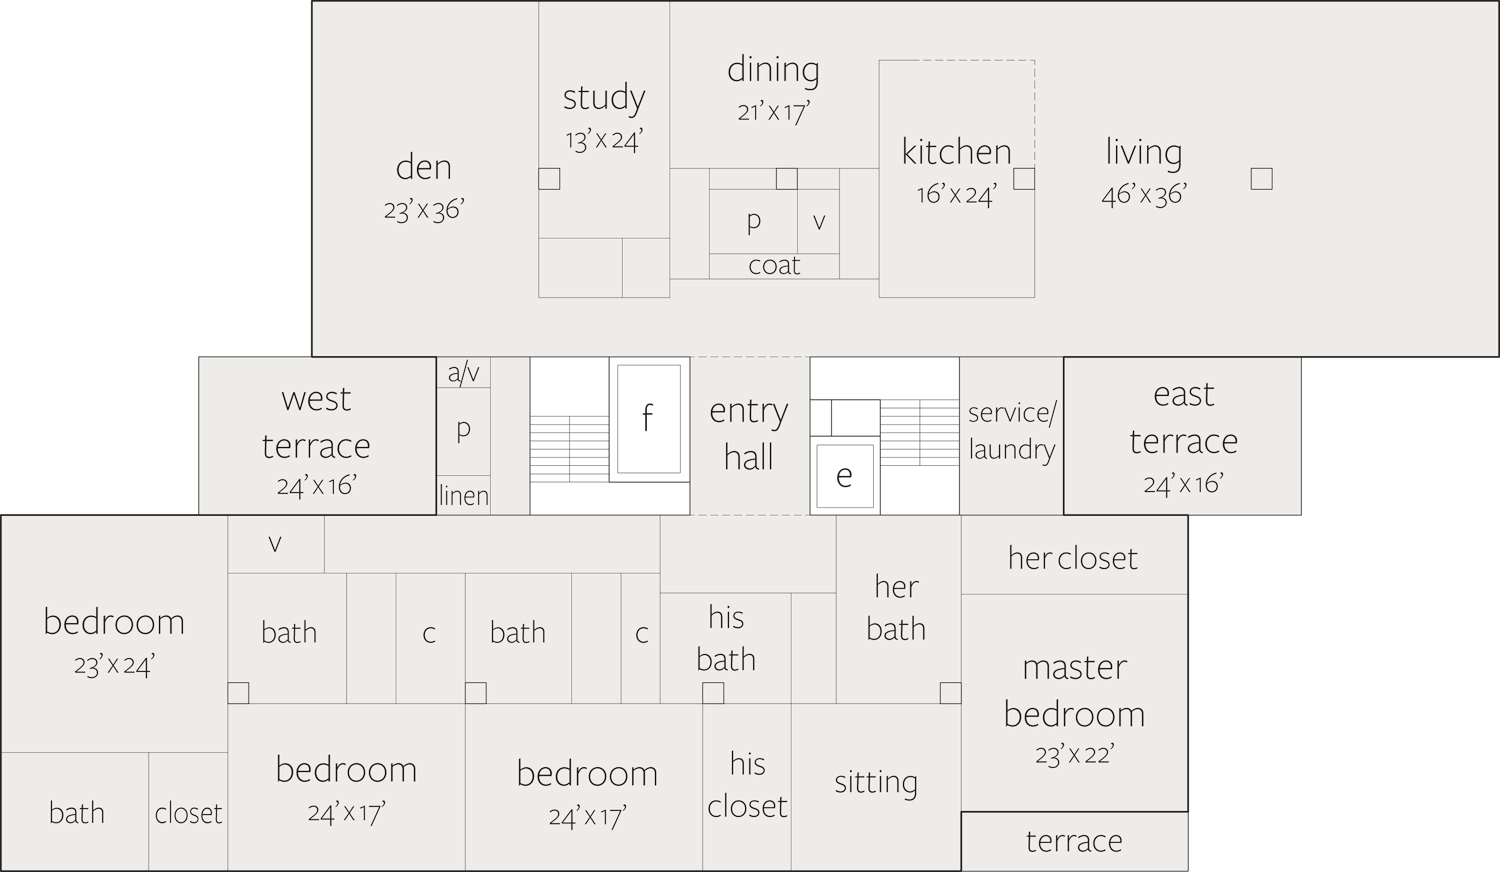 plan_penthouse_with labels.jpg